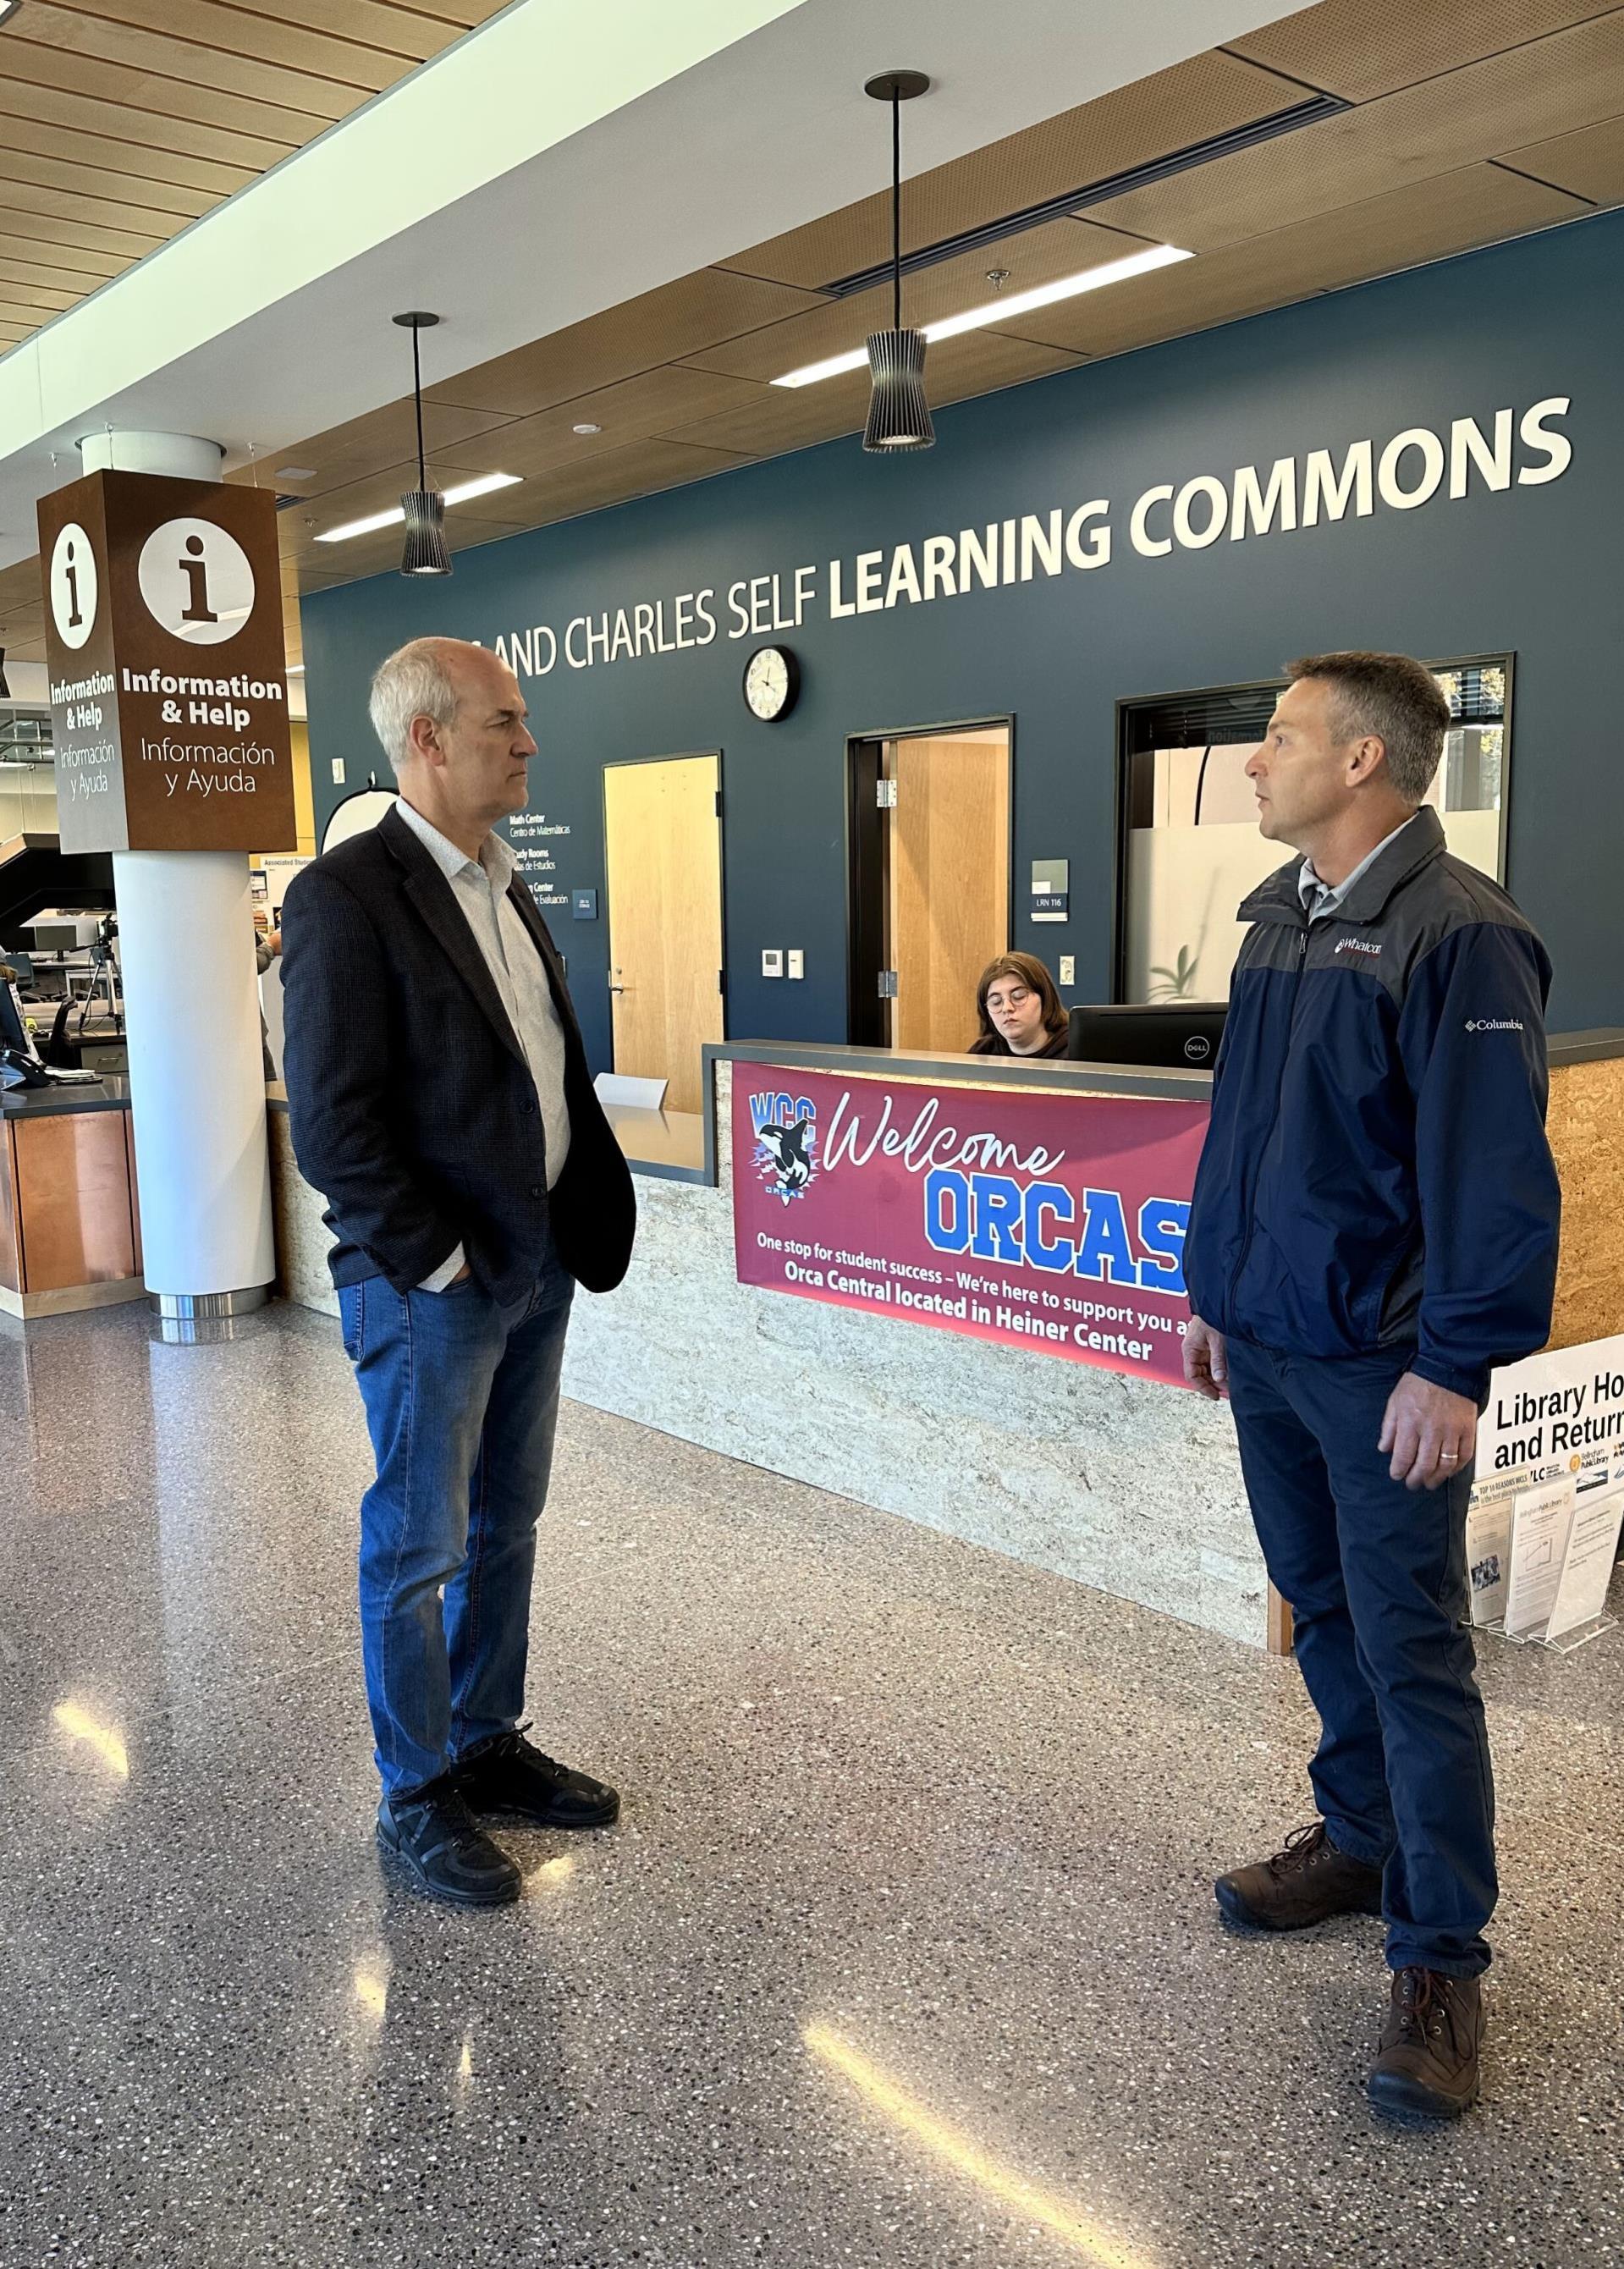 Rick Larsen standing next to Brian Keely in the Learning Commons